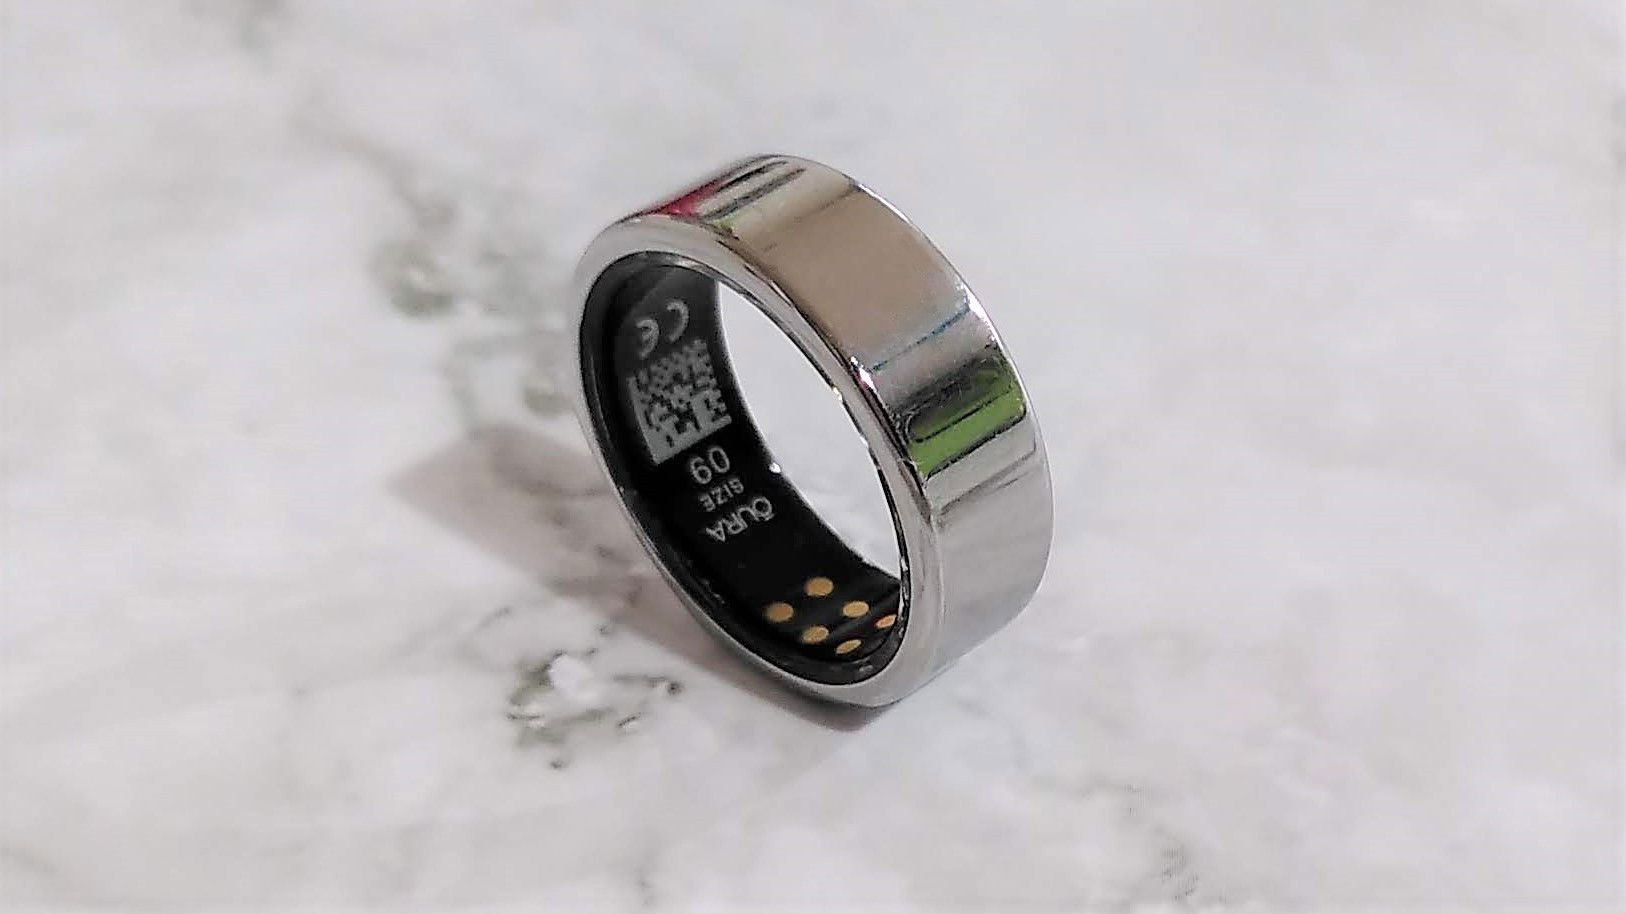  The image shows a silver Samsung Galaxy Ring device which is compatible with Galaxy smartphones and select Android devices.